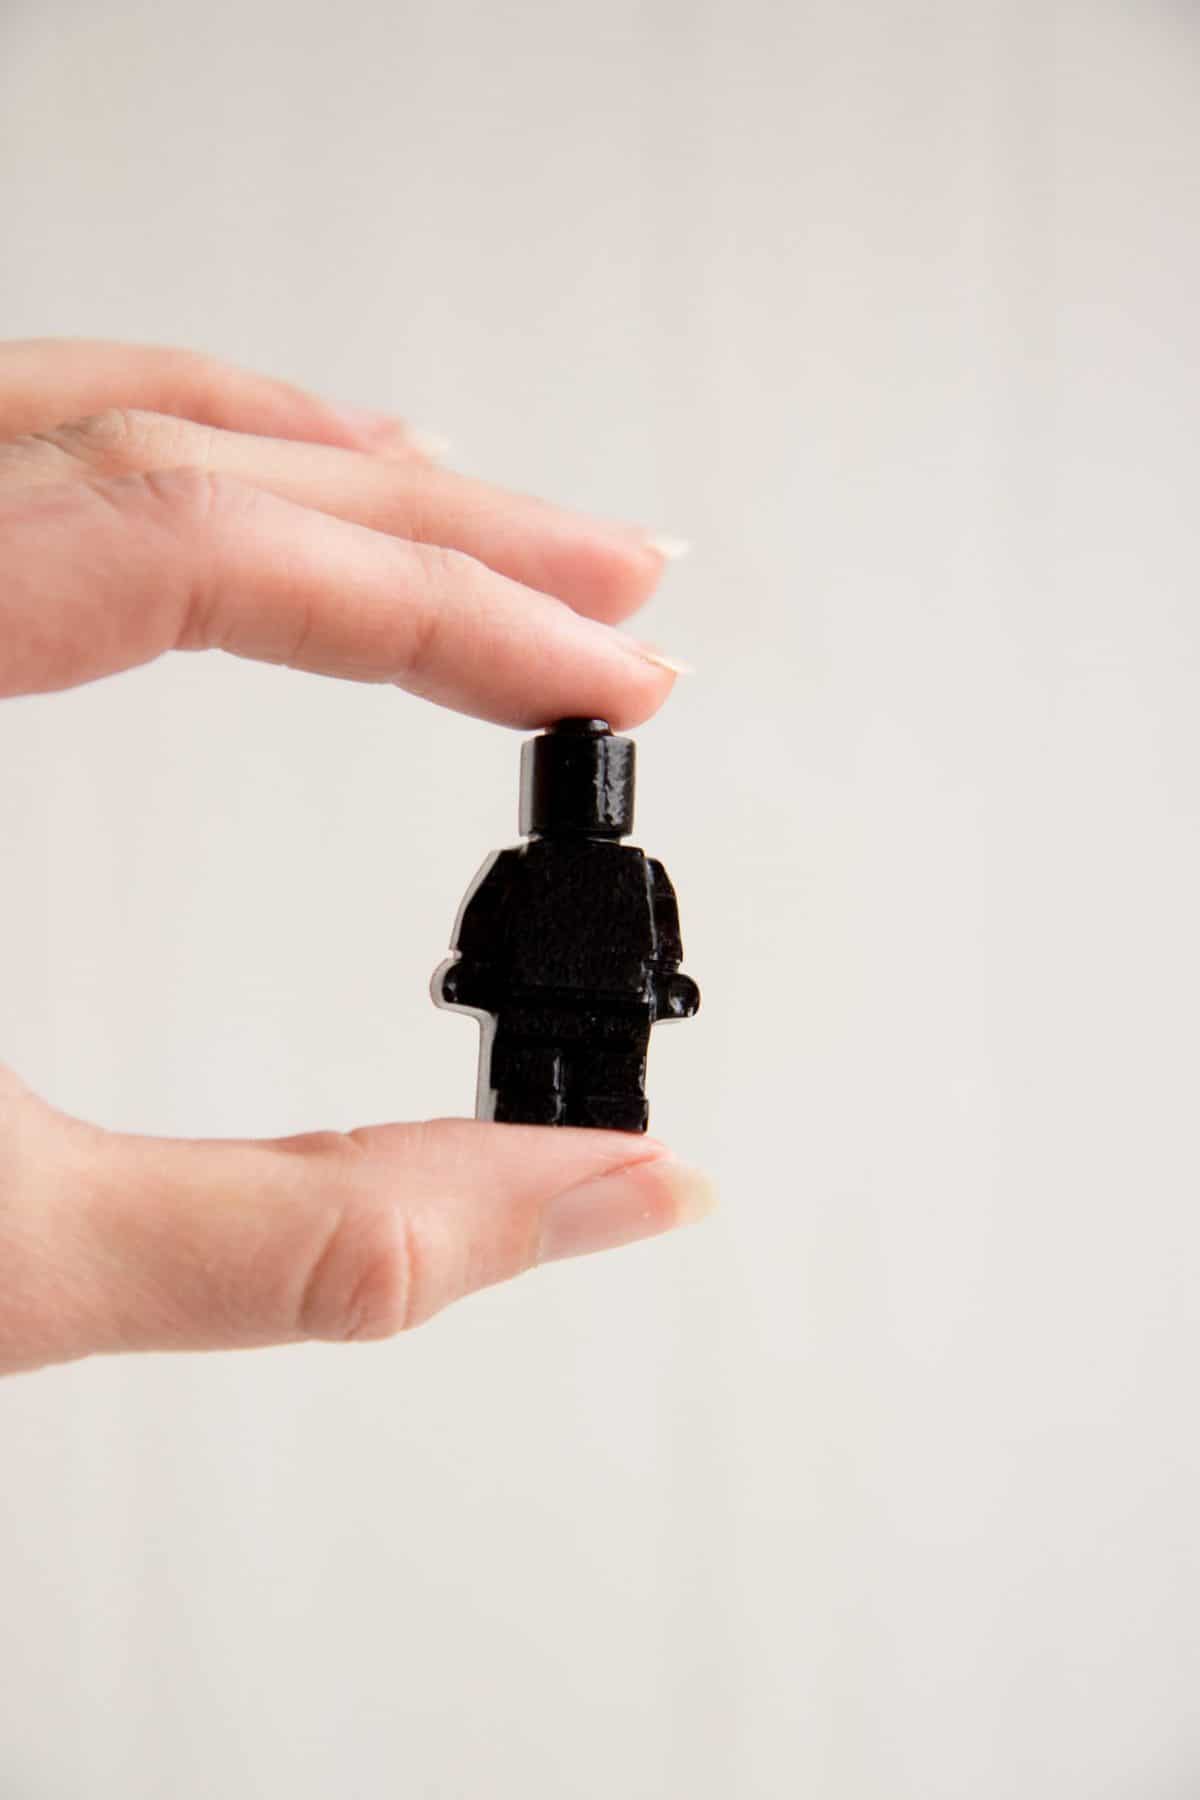 A hand holds a Lego-shaped gummy made from an elderberry syrup recipe.